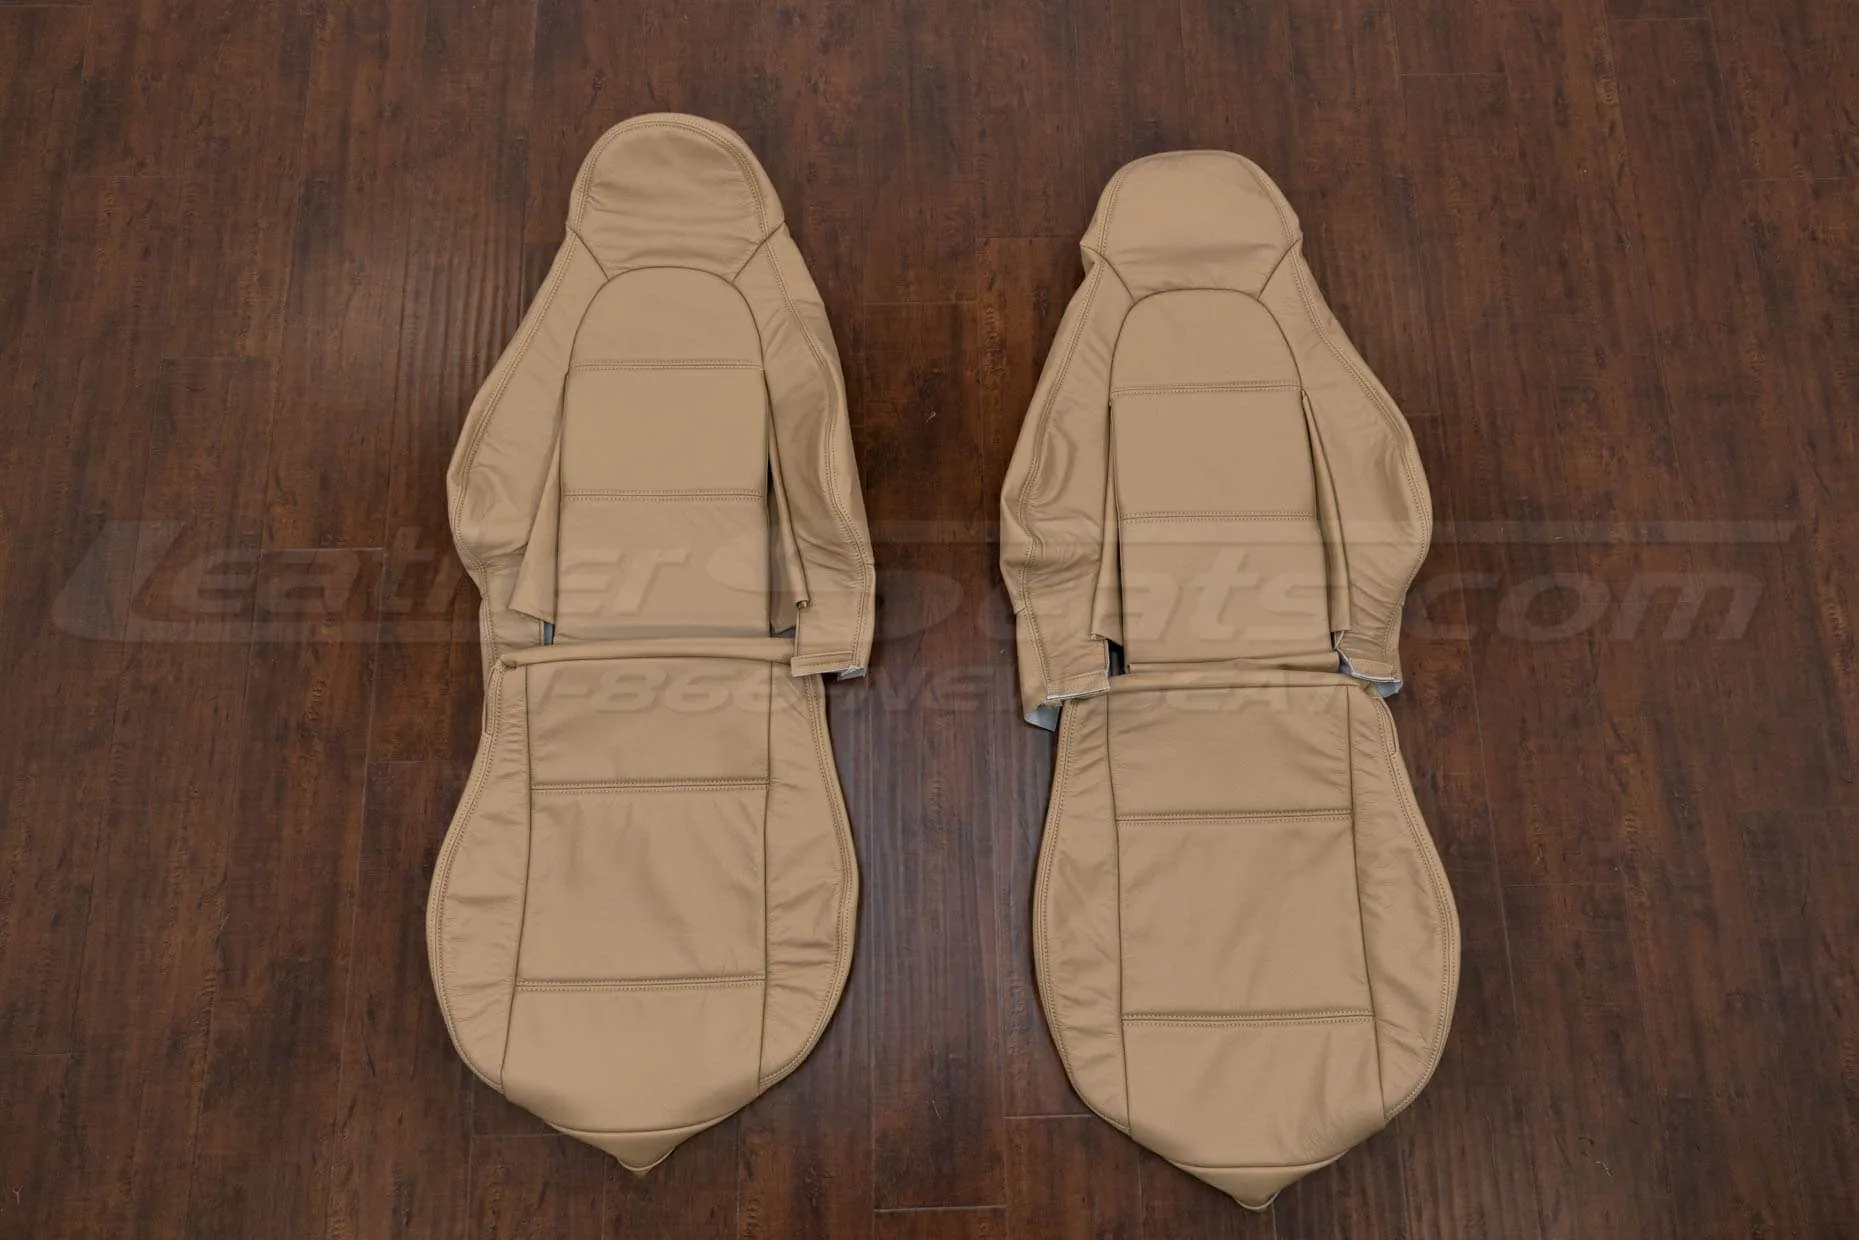 Mazda Miata leather kit - Bisque - Front seat upholstery